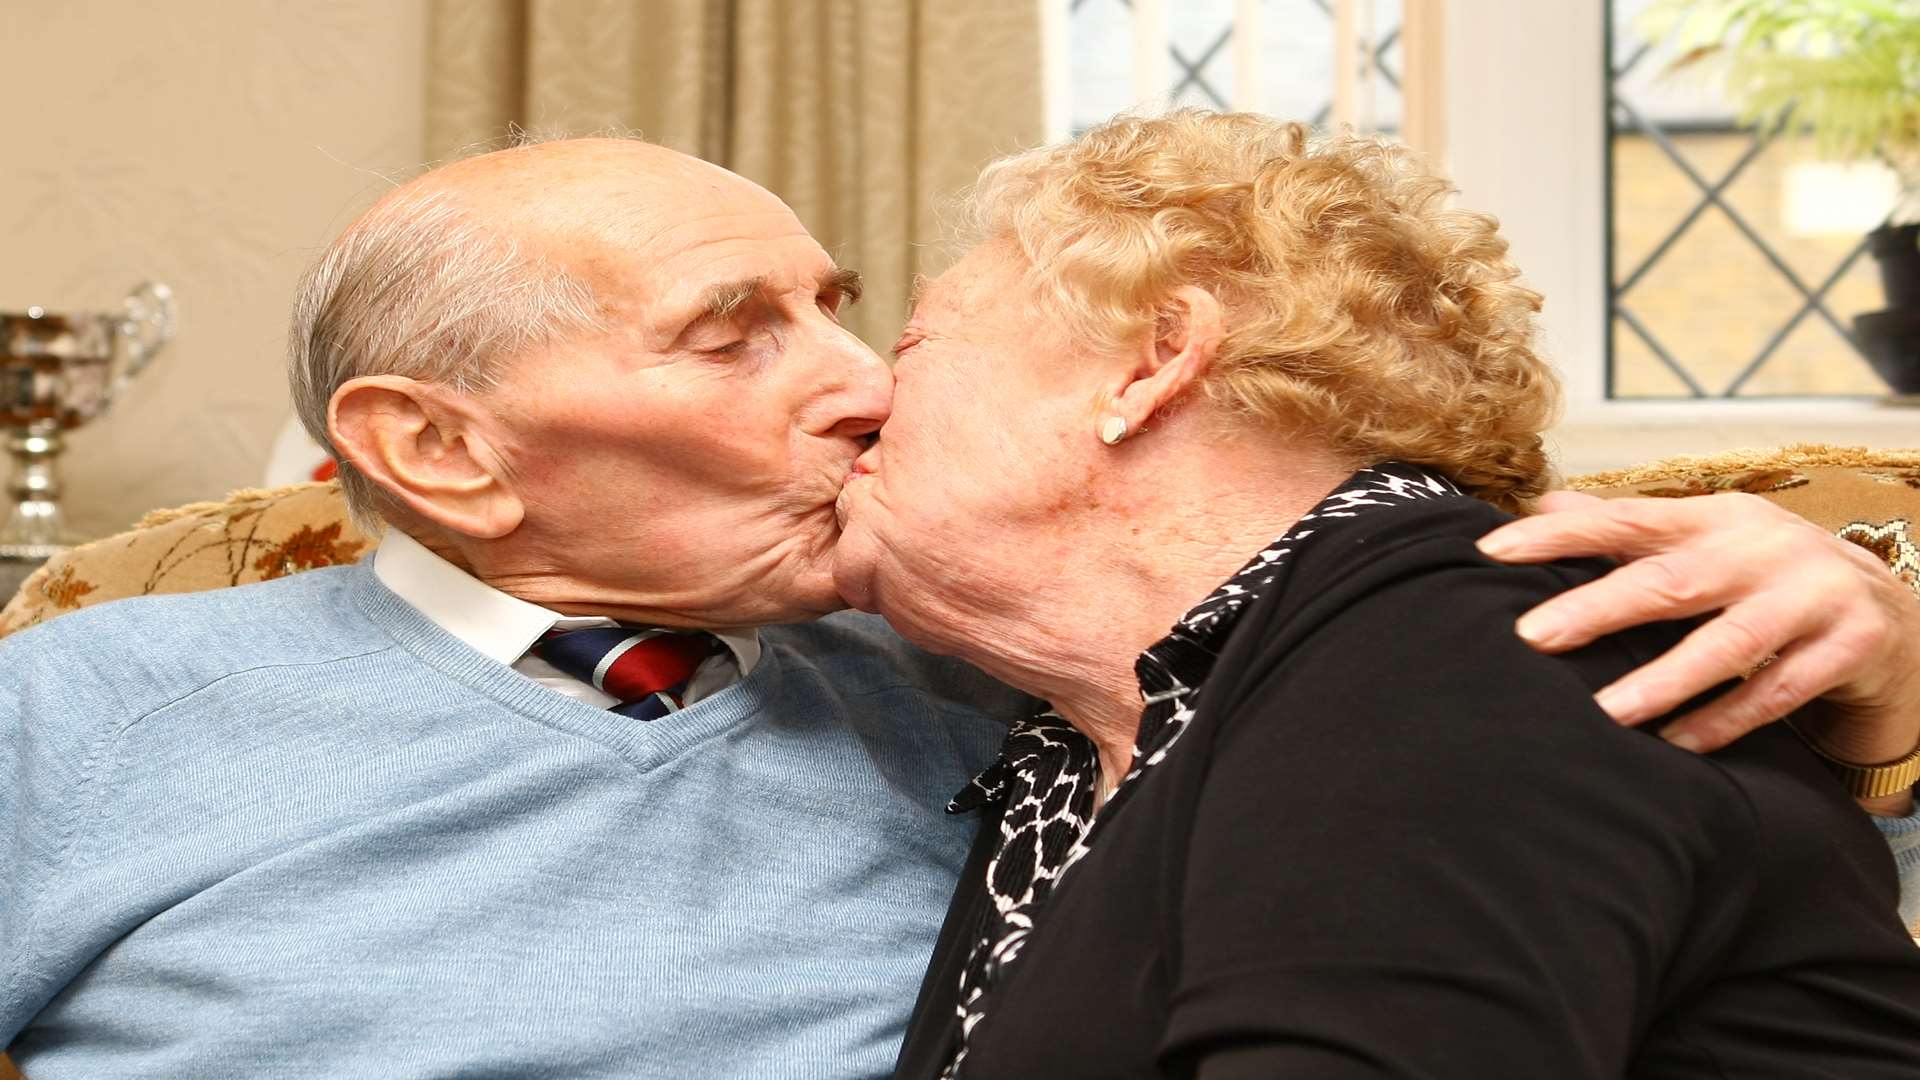 Sharing a kiss after 70 years of marriage